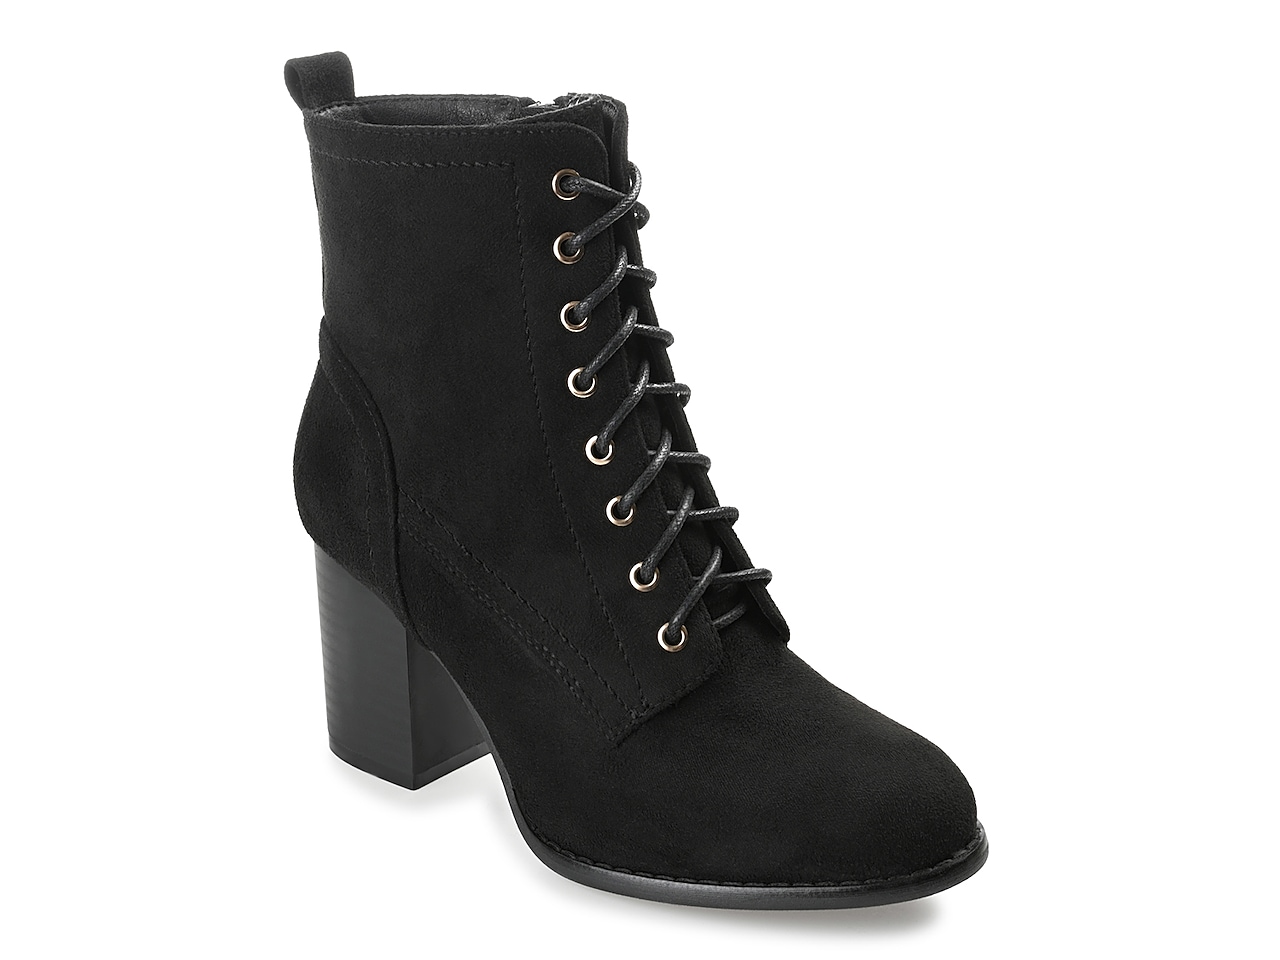 Journee Collection Baylor Bootie | DSW